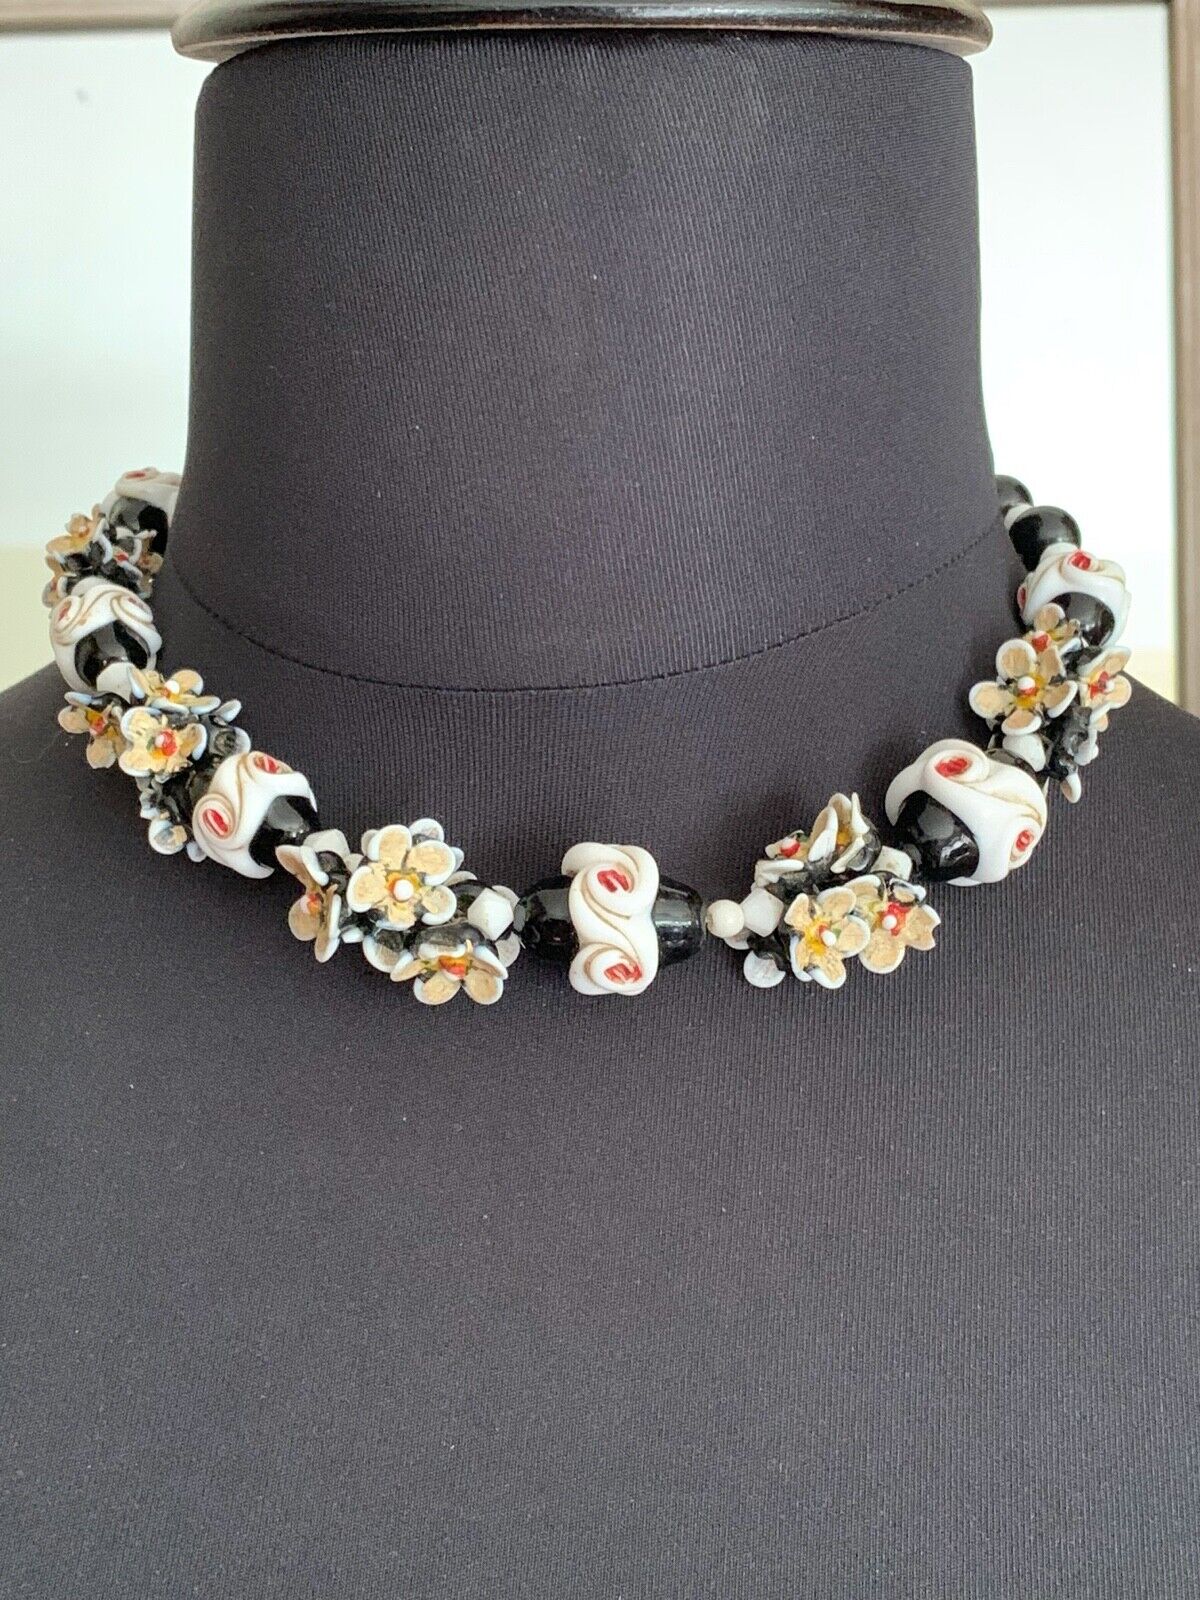 Stunning Antique Necklace - White & Black Glass Roses & groups of small Flowers